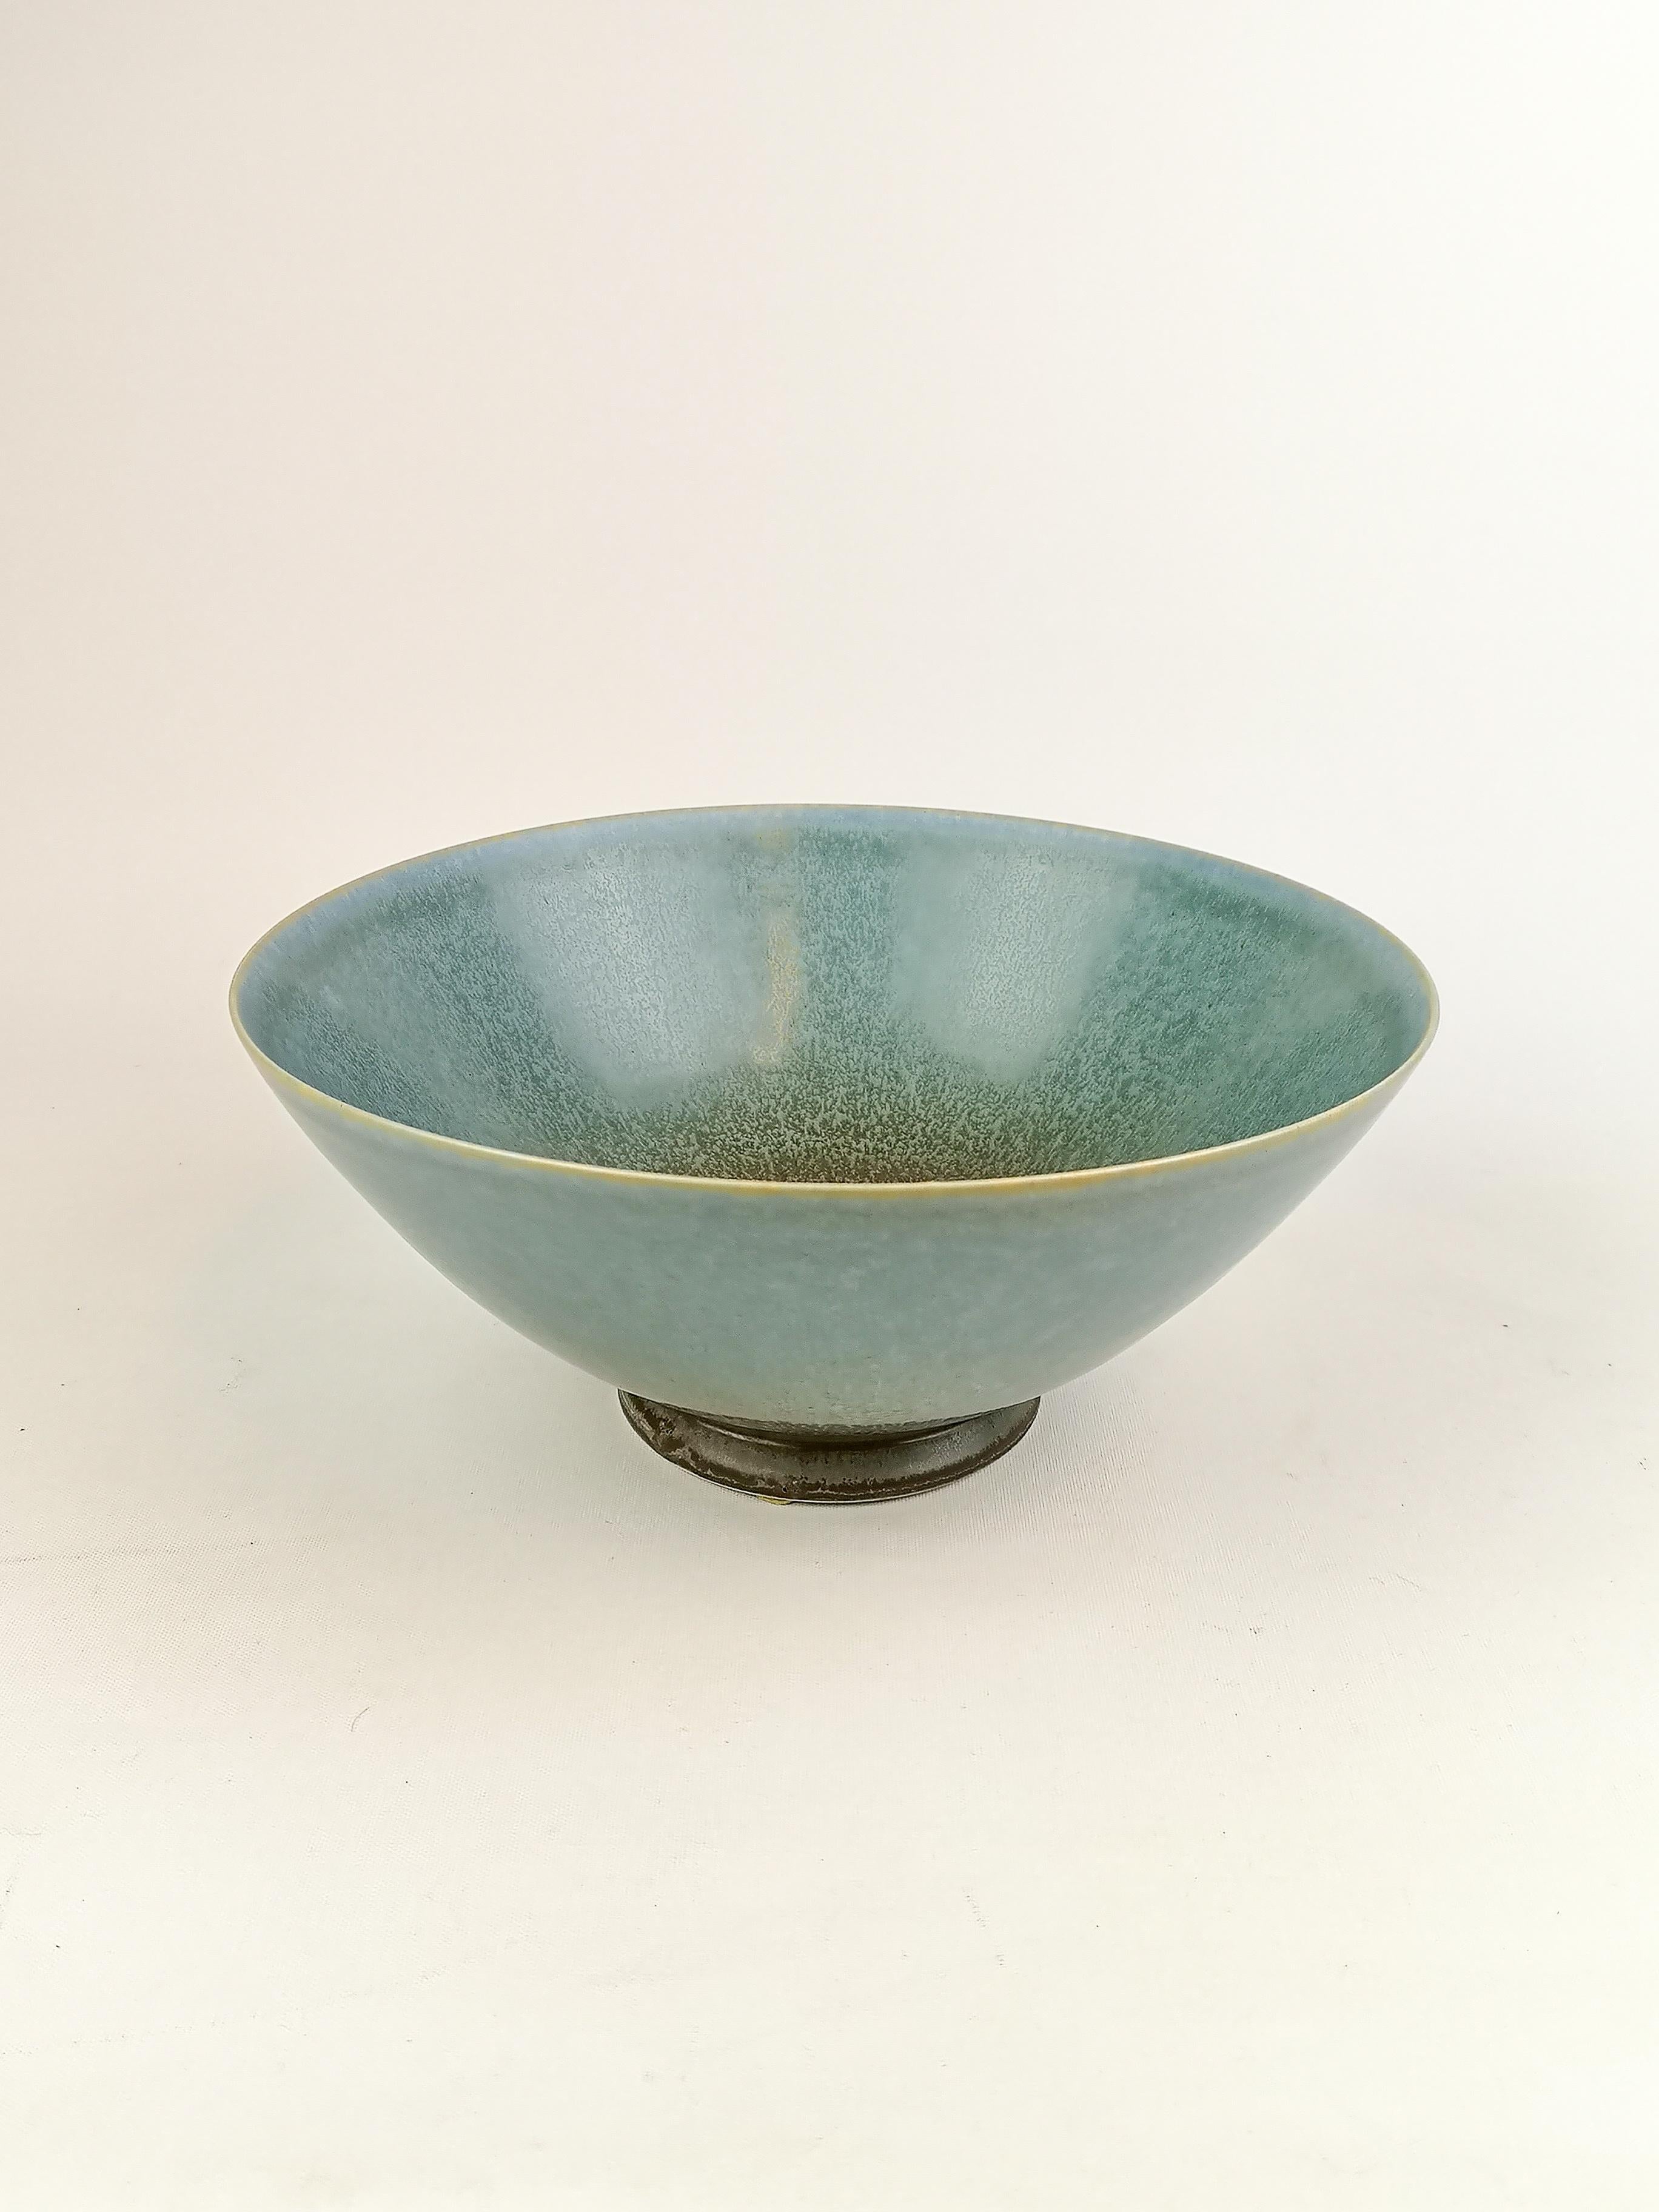 This bowl was handmade and glazed in the K-studio factory at Gustavsberg by Sven Wejsfelt. At the K-studio designers was given the spirit to produce unique art for Gustavsberg. 
The bowl is perfectly shaped and has a wonderful green /blue